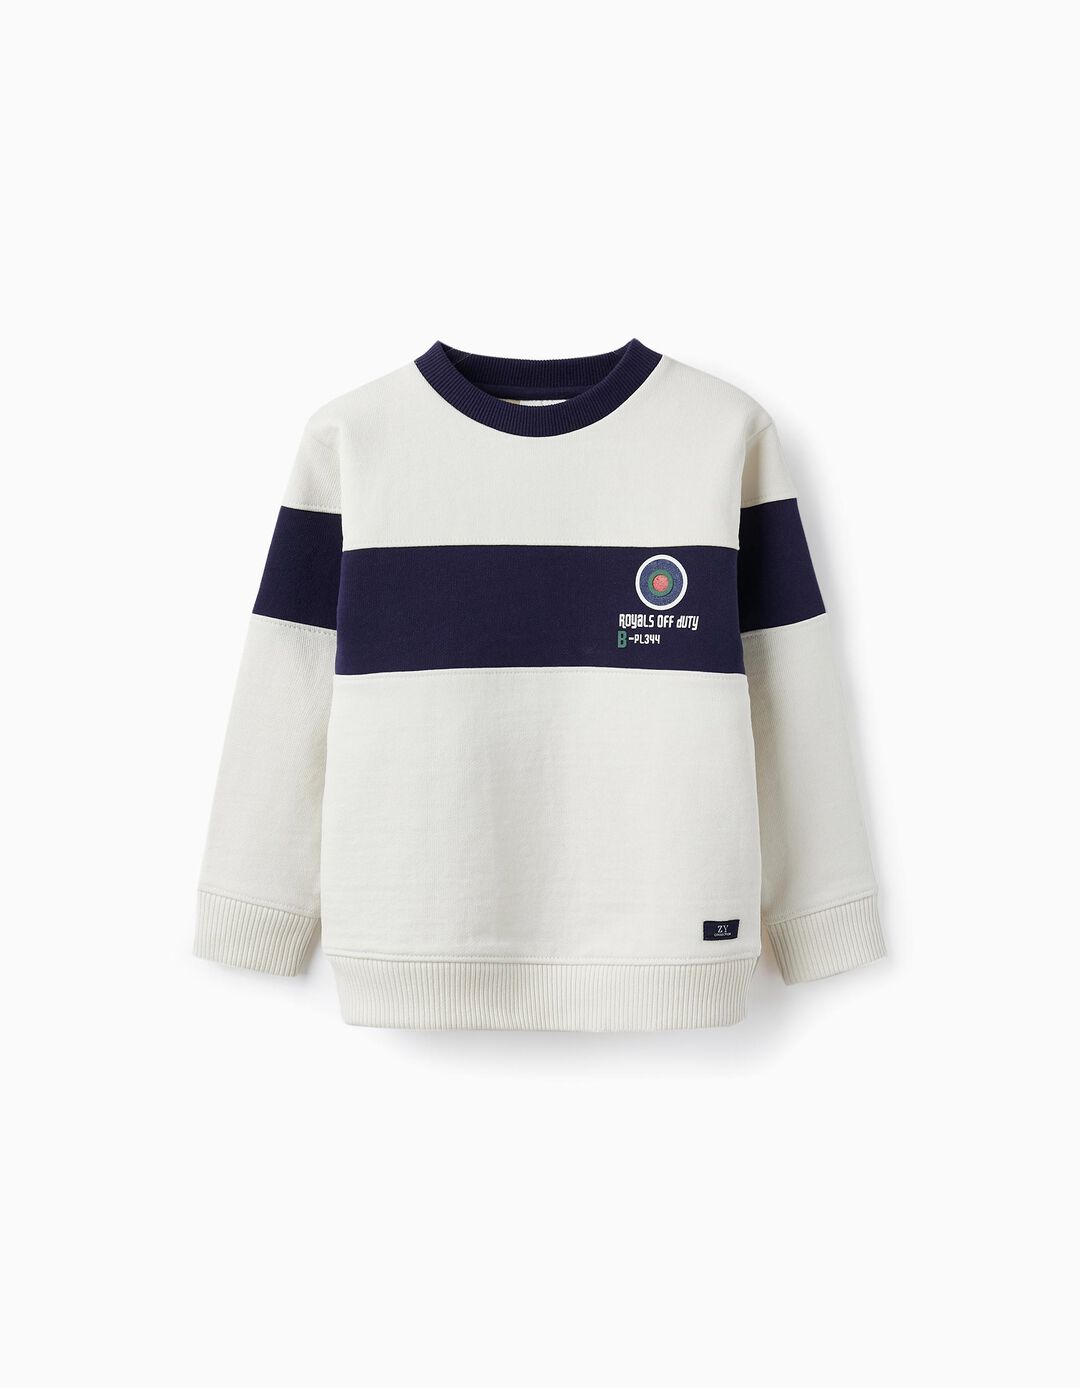 Cotton Jumper for Boys 'Royals Off Duty', White